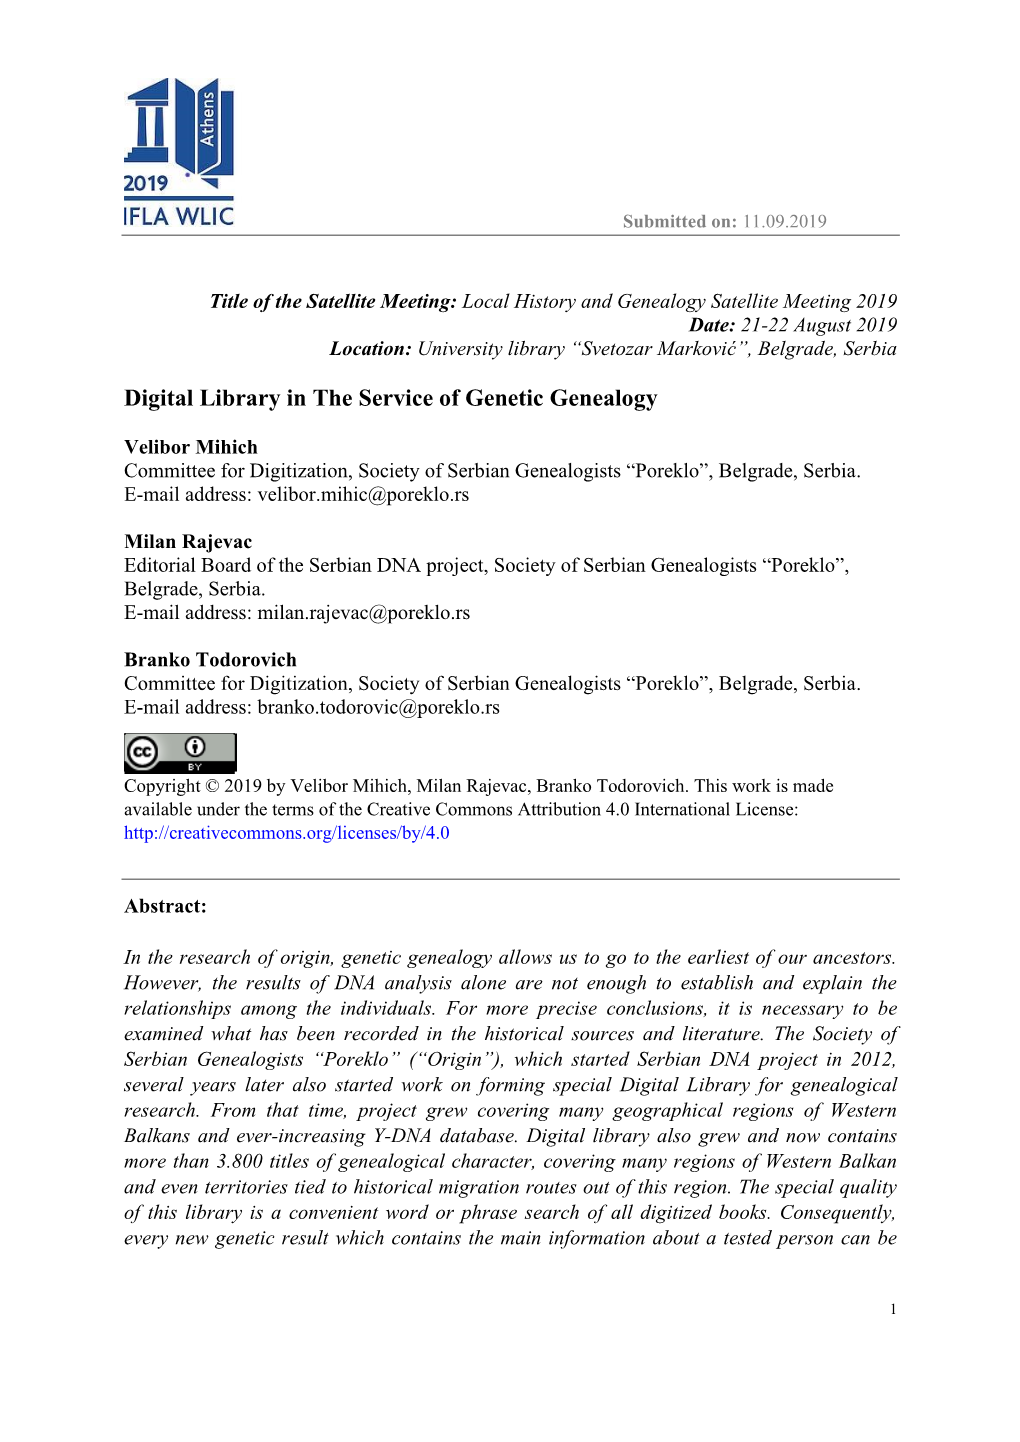 Digital Library in the Service of Genetic Genealogy